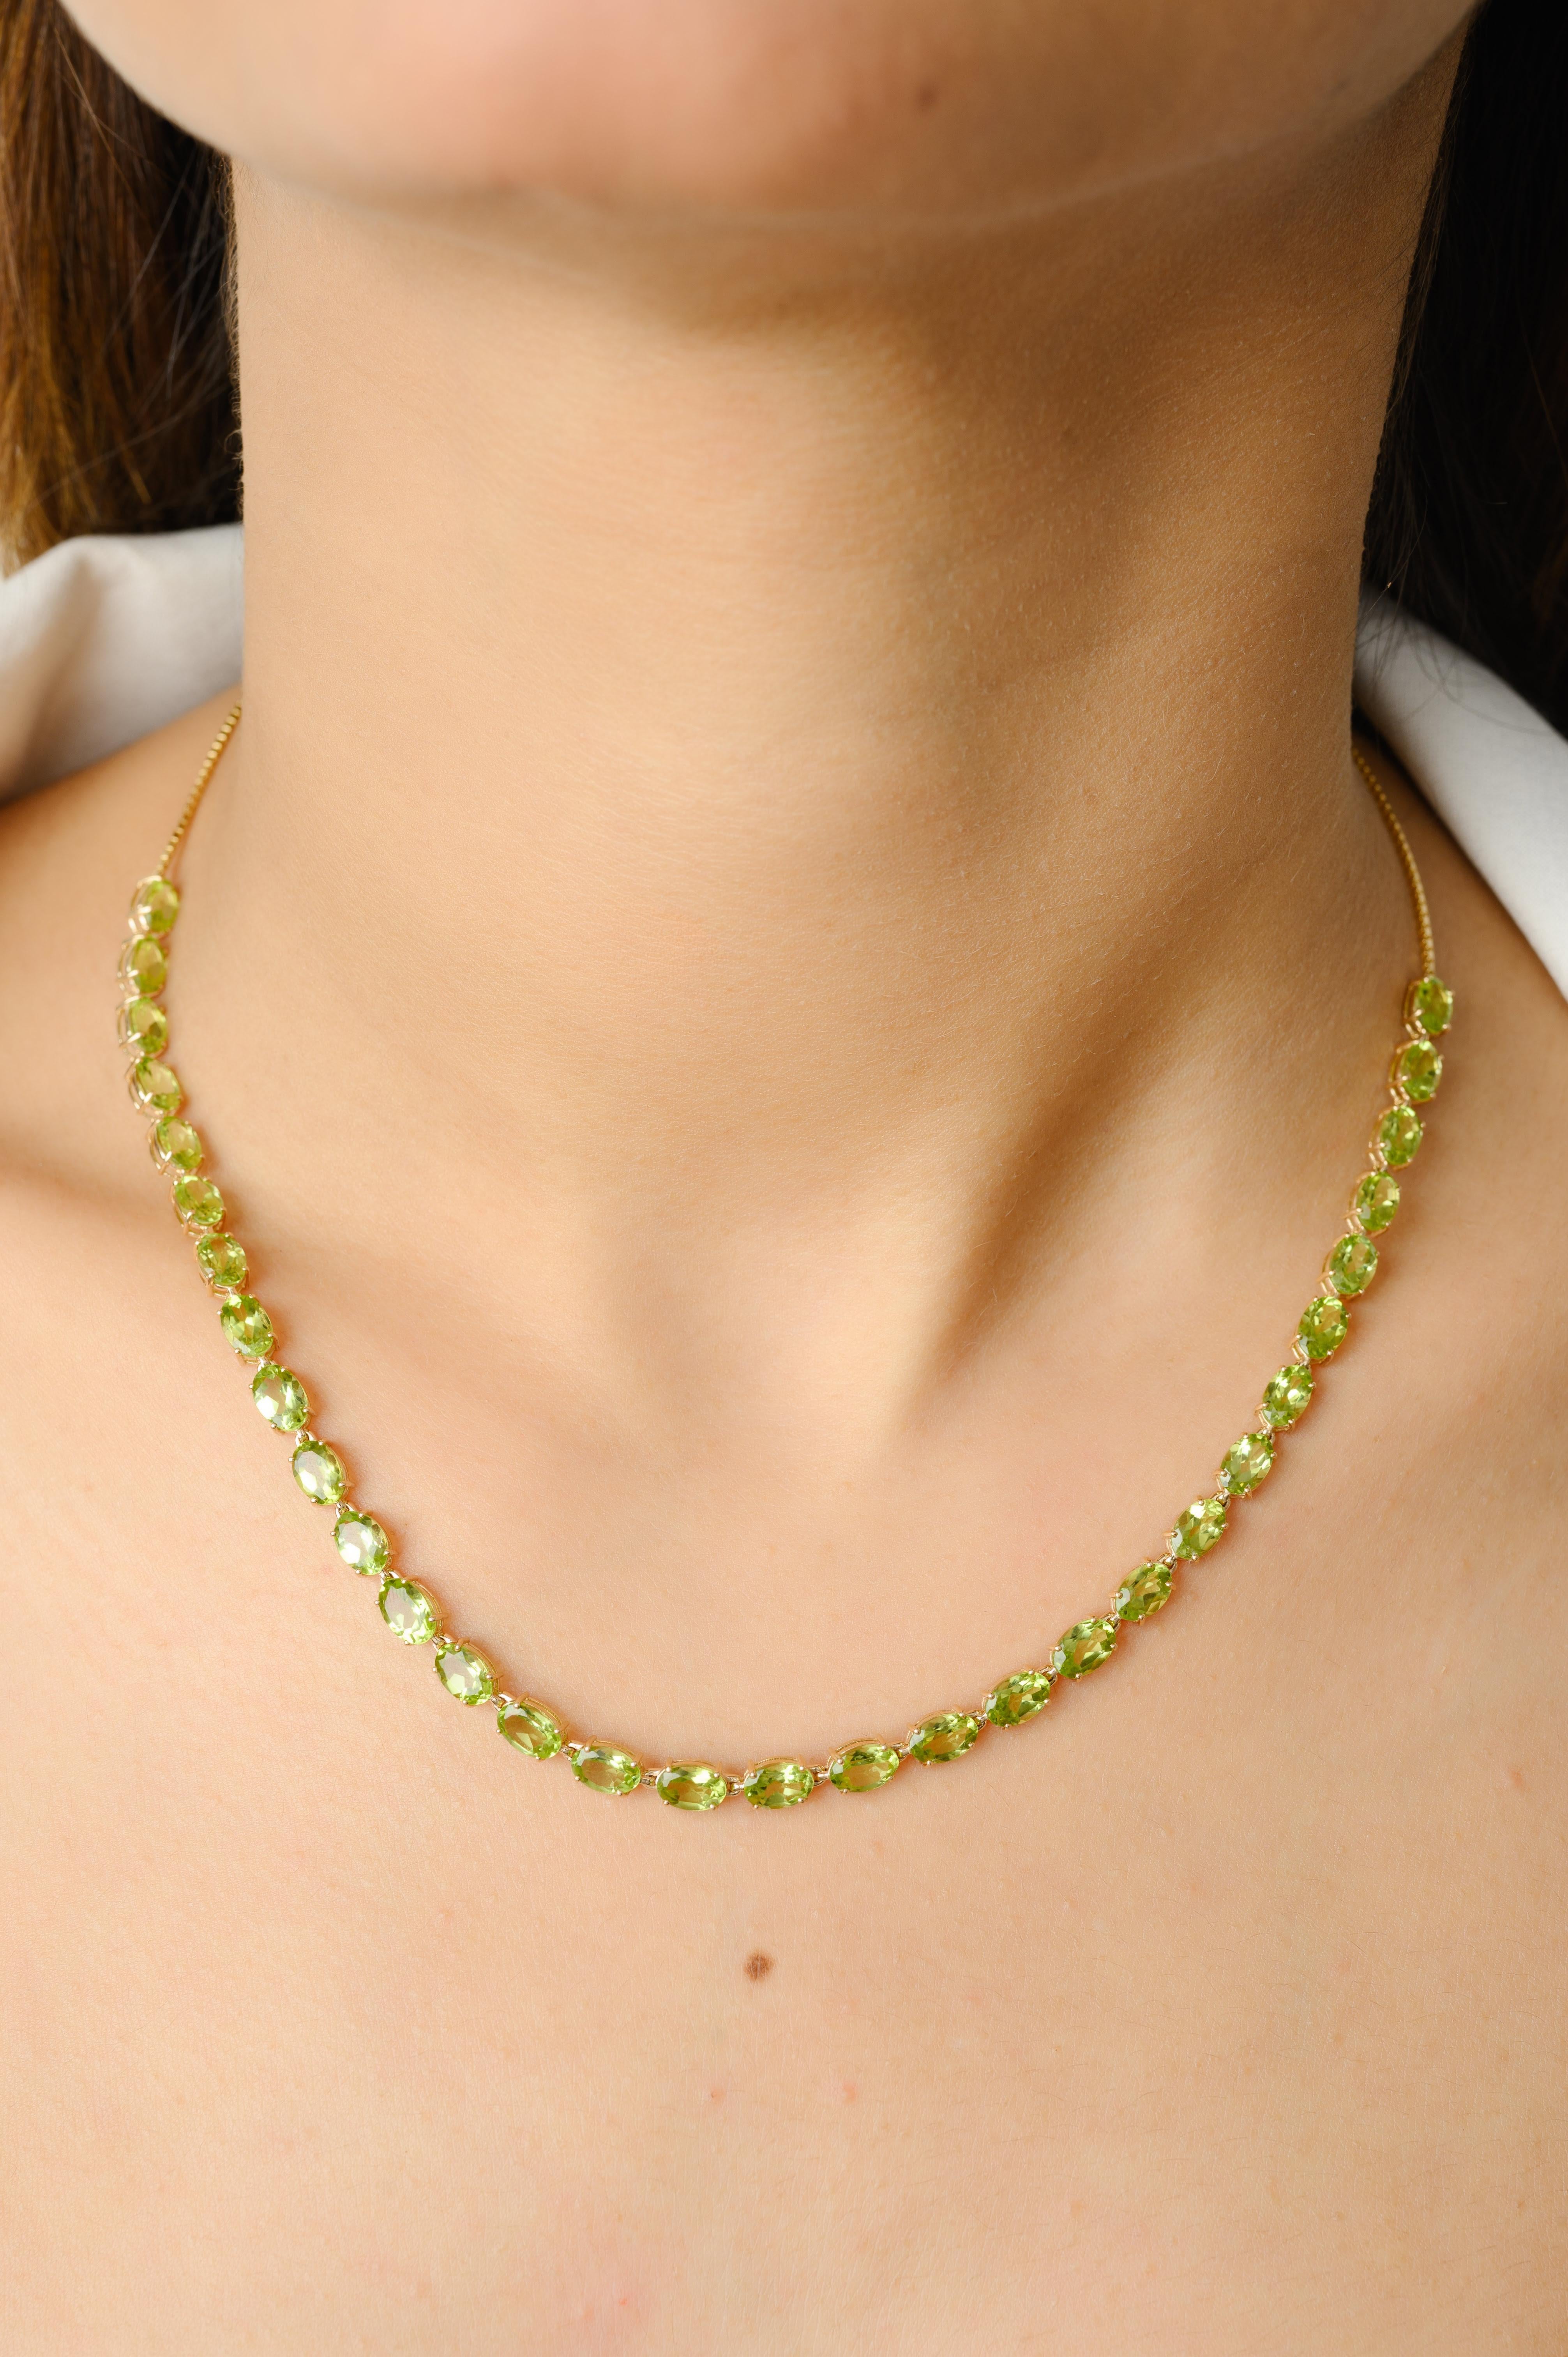 Modern 14k Yellow Gold 18.13ct Natural Peridot Necklace and Earrings Jewelry Set For Sale